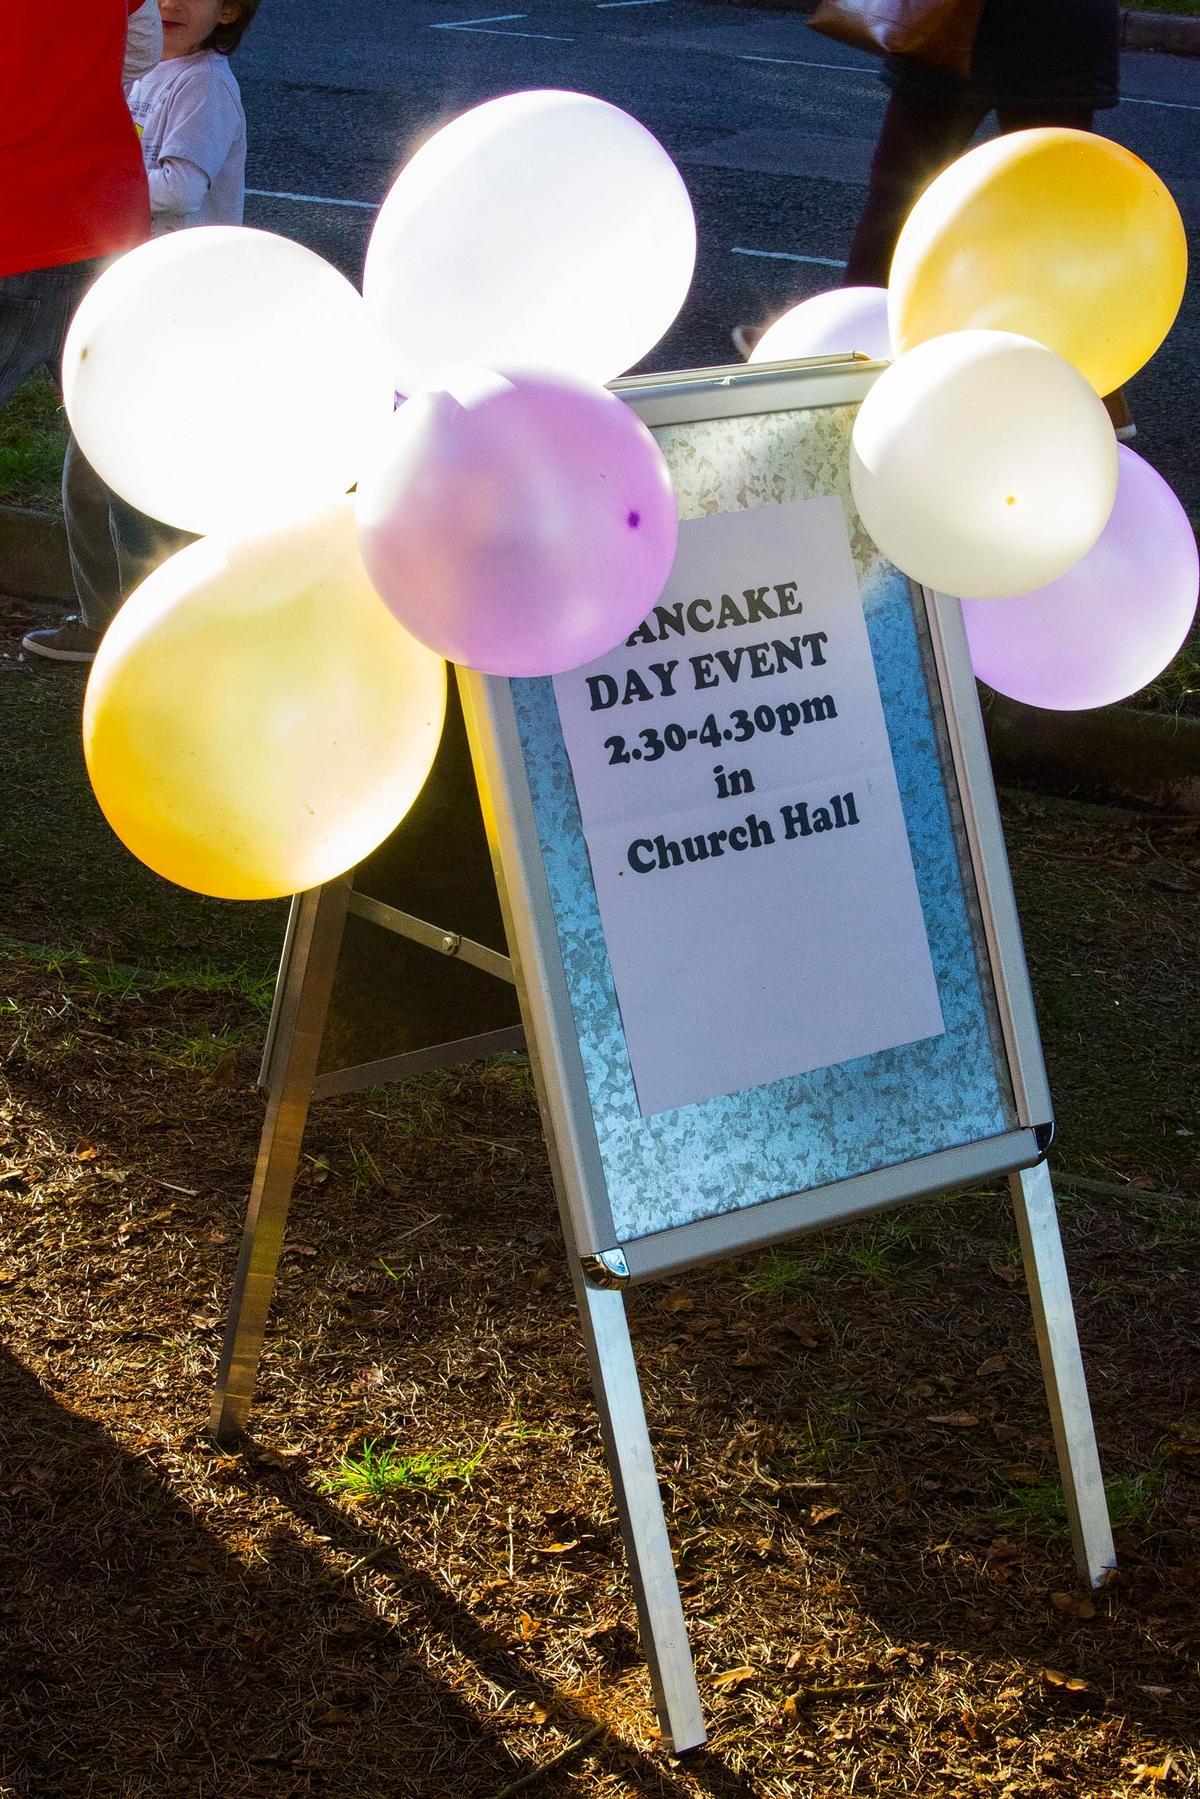 St Anselm's Sunday School in Westfield Park hosted a Shrove Tuesday event, in which children decorated a tree with ideas of things they could give up for Lent.